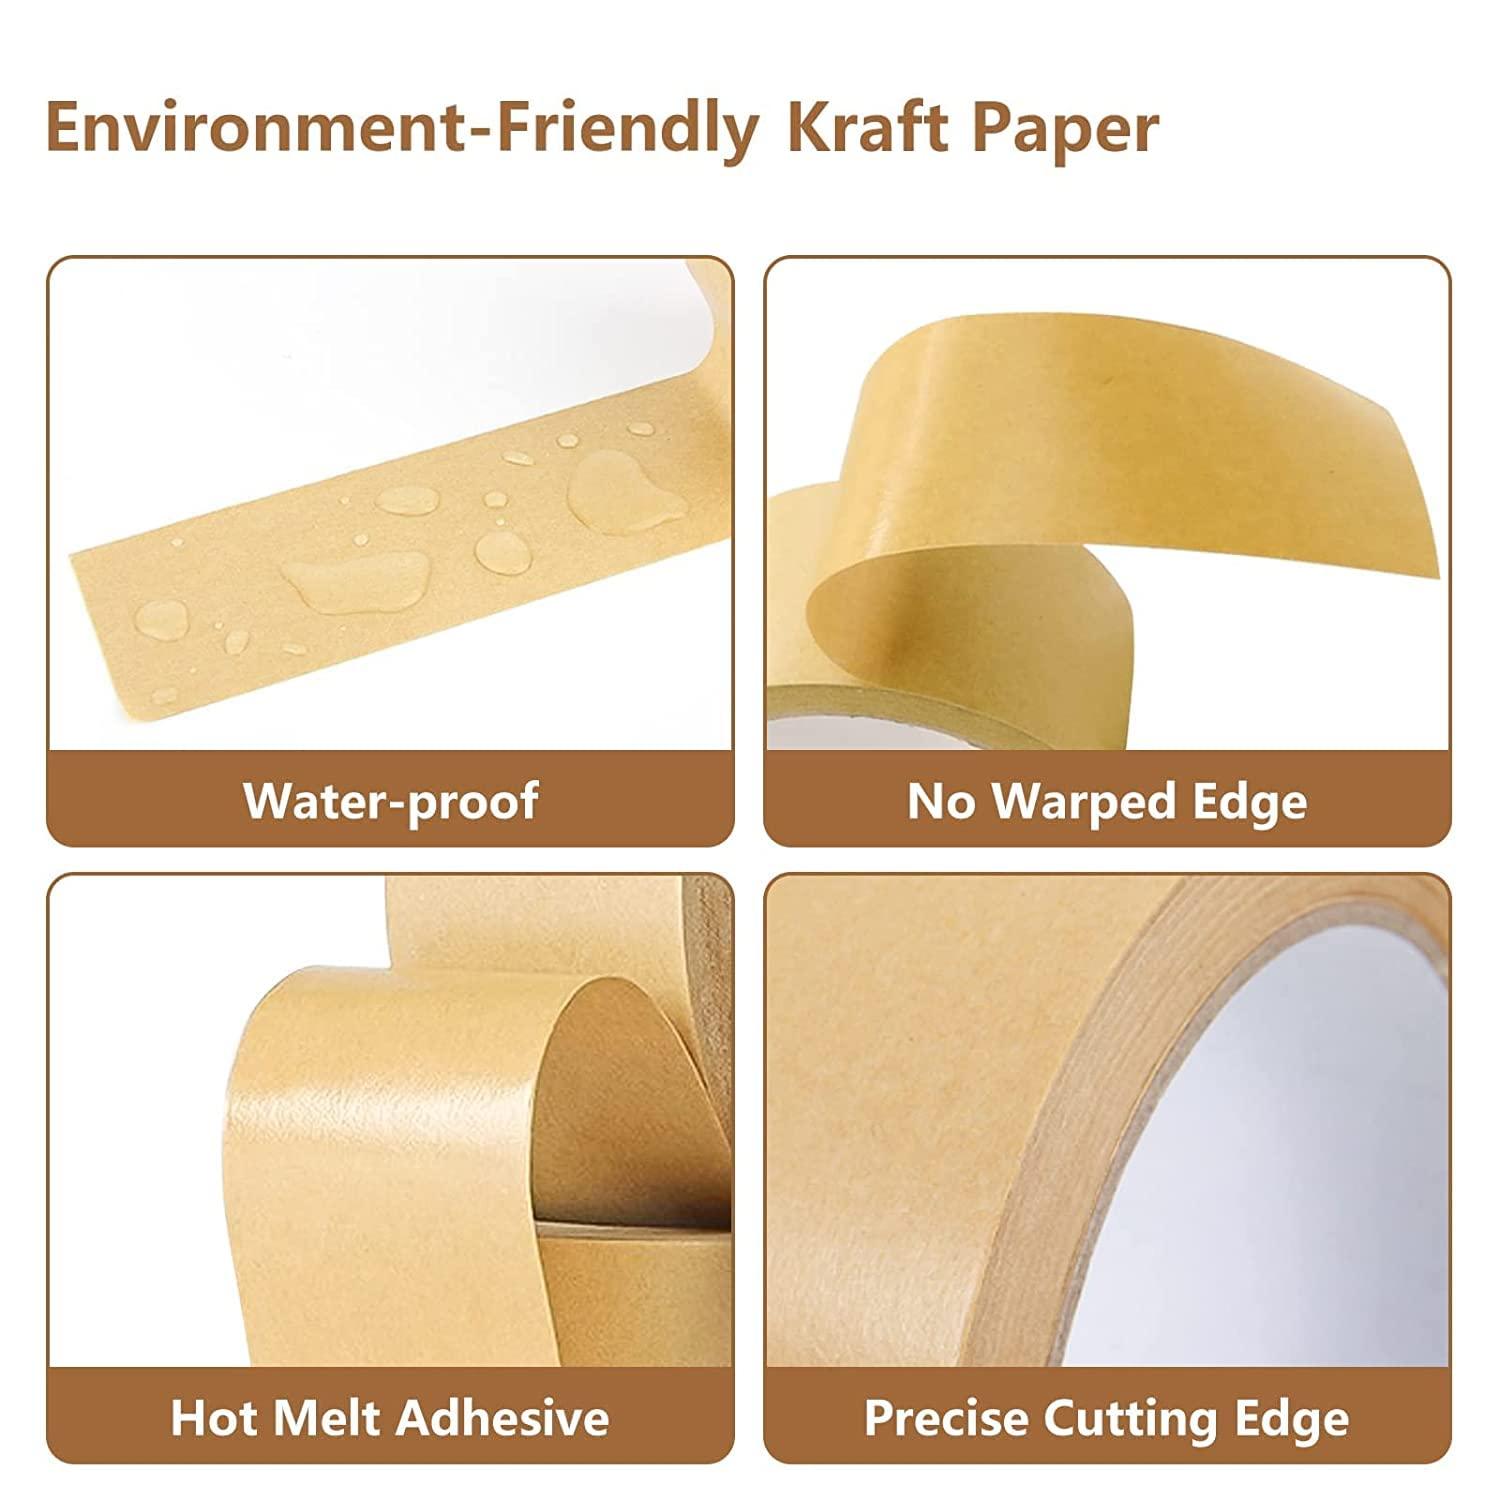 TooCust Kraft Paper Tape Self Adhesive 2 X55YD Brown Paper Tape  Biodegradable Brown Packing Tape Paper Packing Tape with Strong Adhesive  Waterproof Tape Not Writable 1 roll